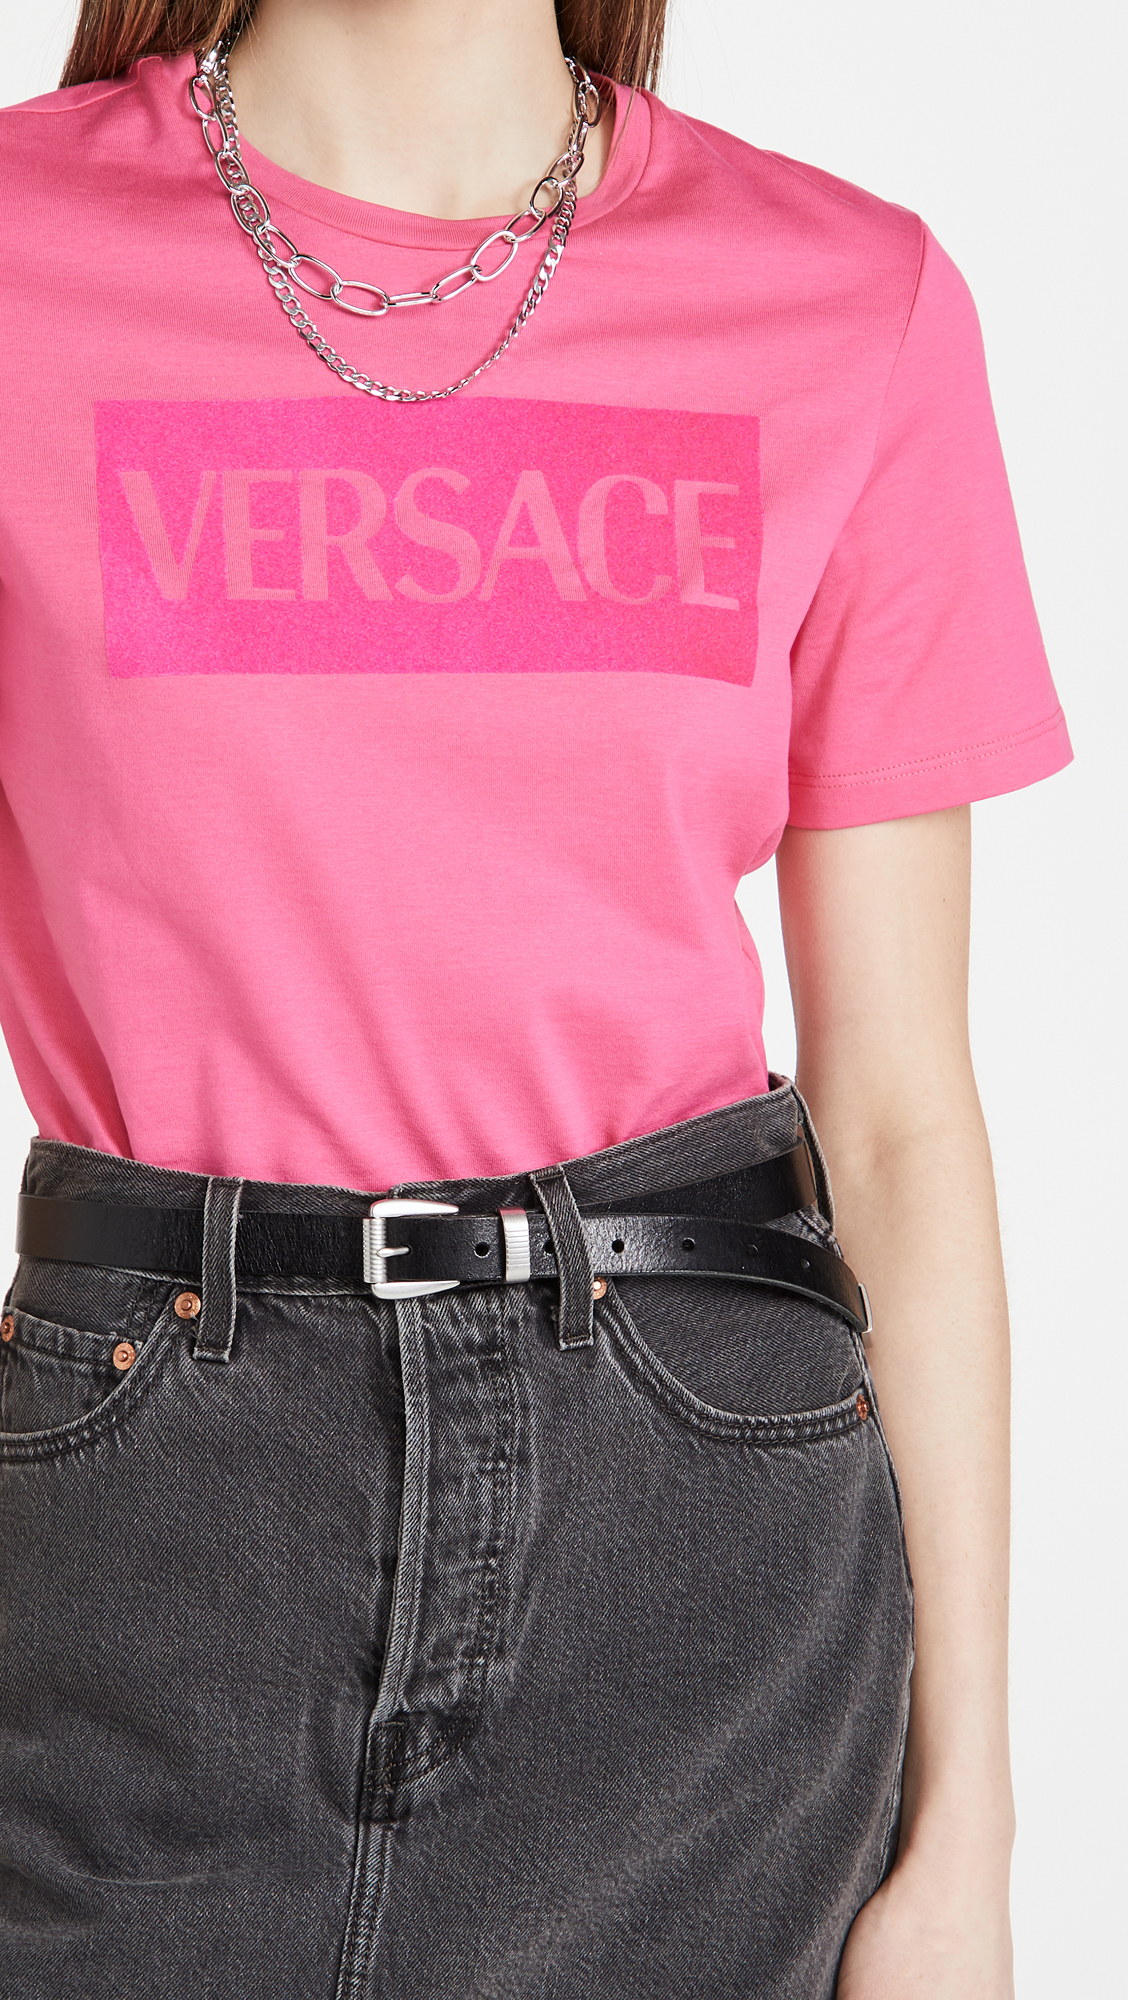 The 24 Best Designer T-Shirts for Women | Who What Wear